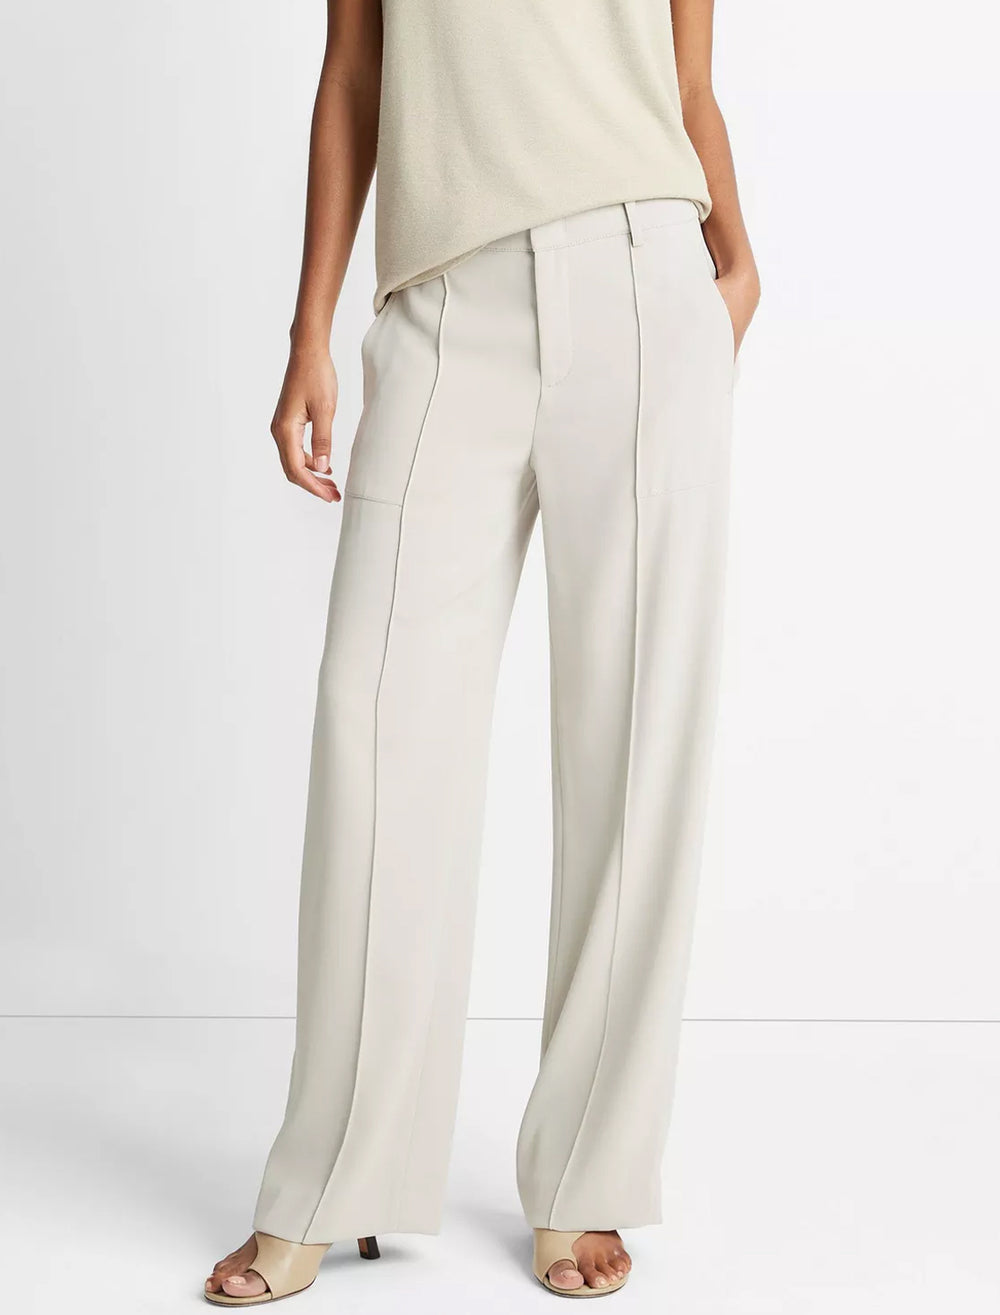 Model wearing Vince's crepe wide leg utility pant in sepia.